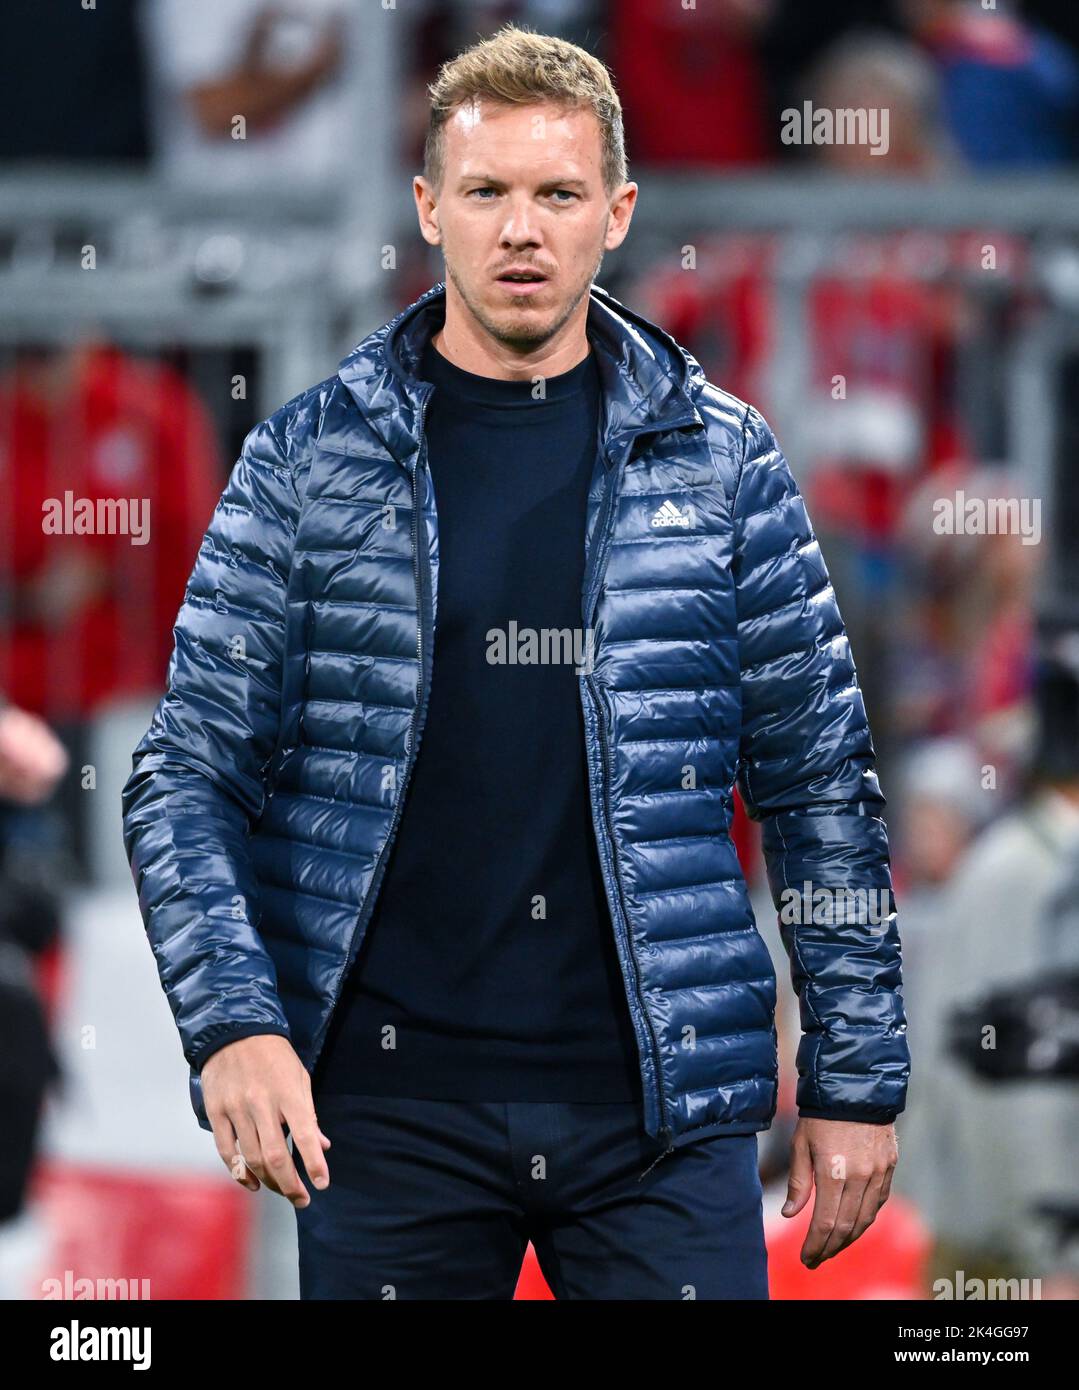 Munich, Germany. 30th Sep, 2022. Soccer: Bundesliga, Bayern Munich - Bayer Leverkusen, match day 8 at Allianz Arena. Coach Julian Nagelsmann of Munich arrives at the stadium before the match. Credit: Sven Hoppe/dpa - IMPORTANT NOTE: In accordance with the requirements of the DFL Deutsche Fußball Liga and the DFB Deutscher Fußball-Bund, it is prohibited to use or have used photographs taken in the stadium and/or of the match in the form of sequence pictures and/or video-like photo series./dpa/Alamy Live News Stock Photo